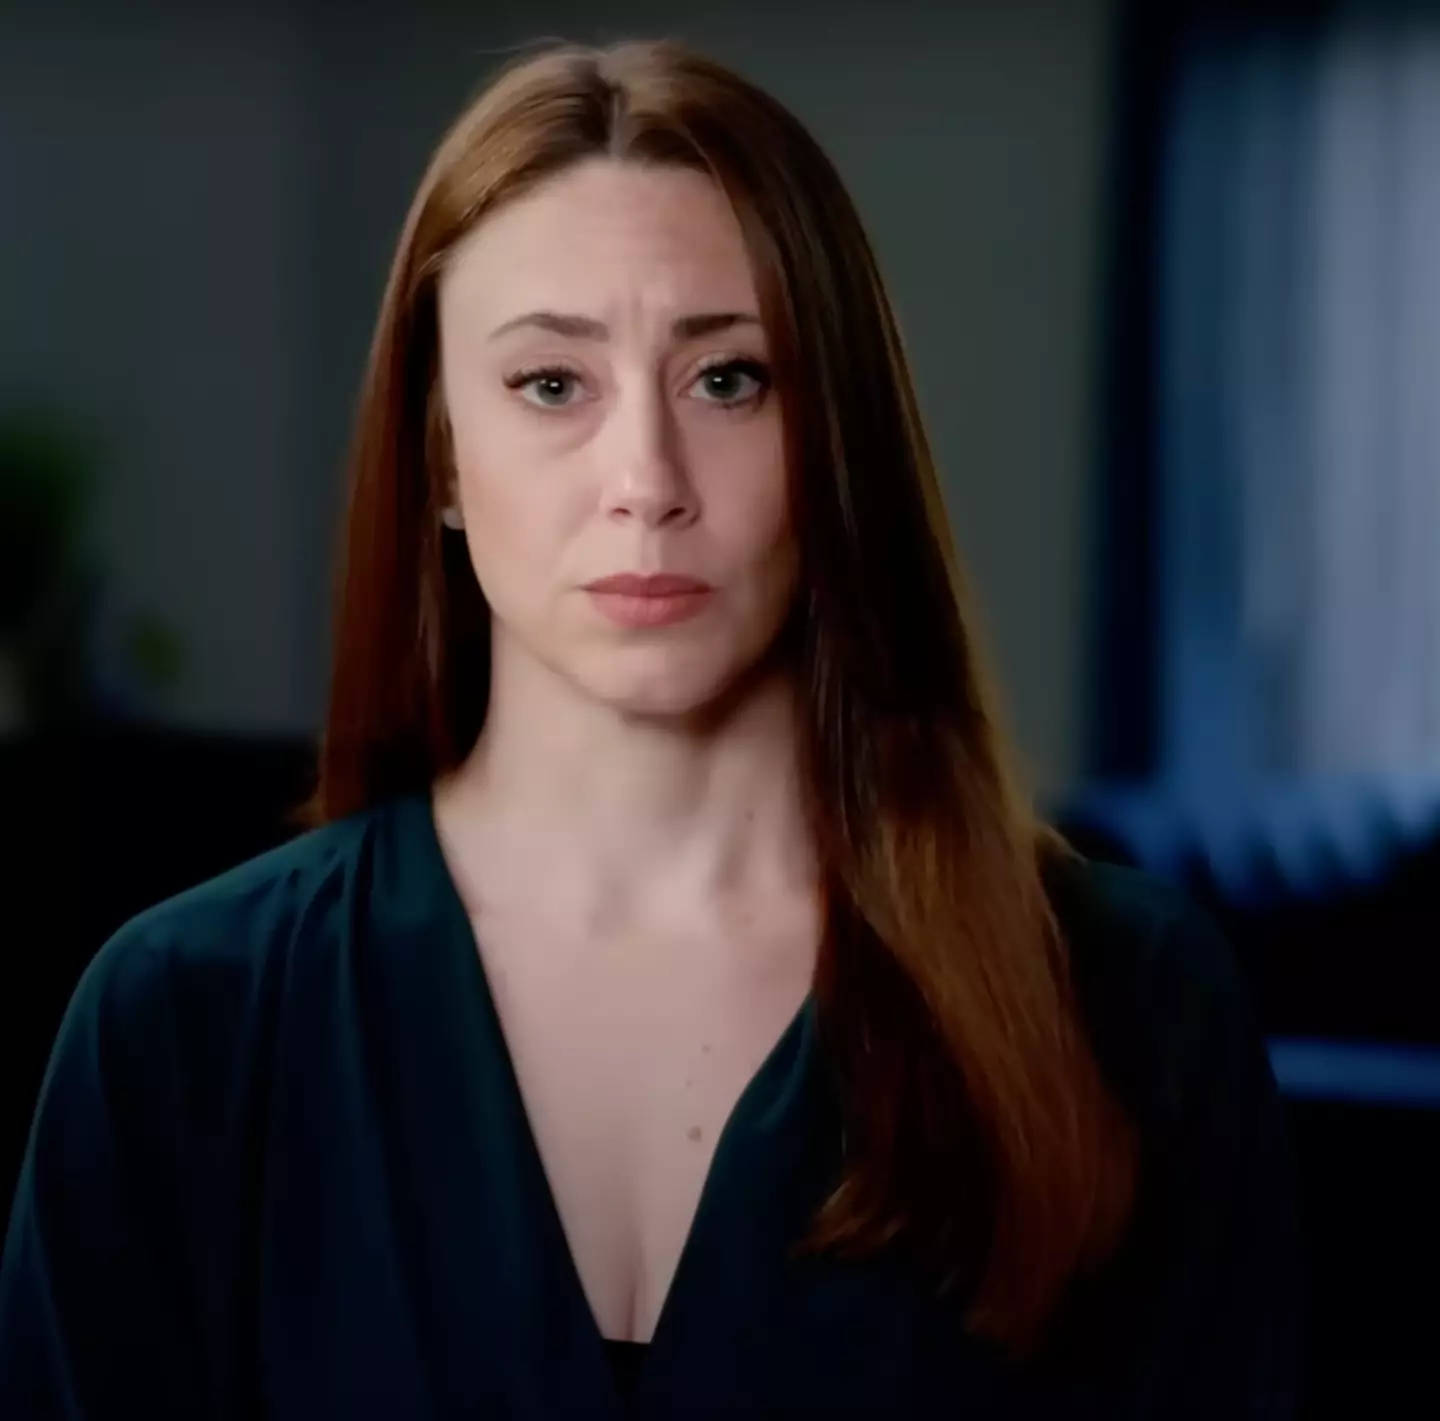 The first on-camera interview comes in a three-part documentary titled Casey Anthony: Where The Truth Lies.